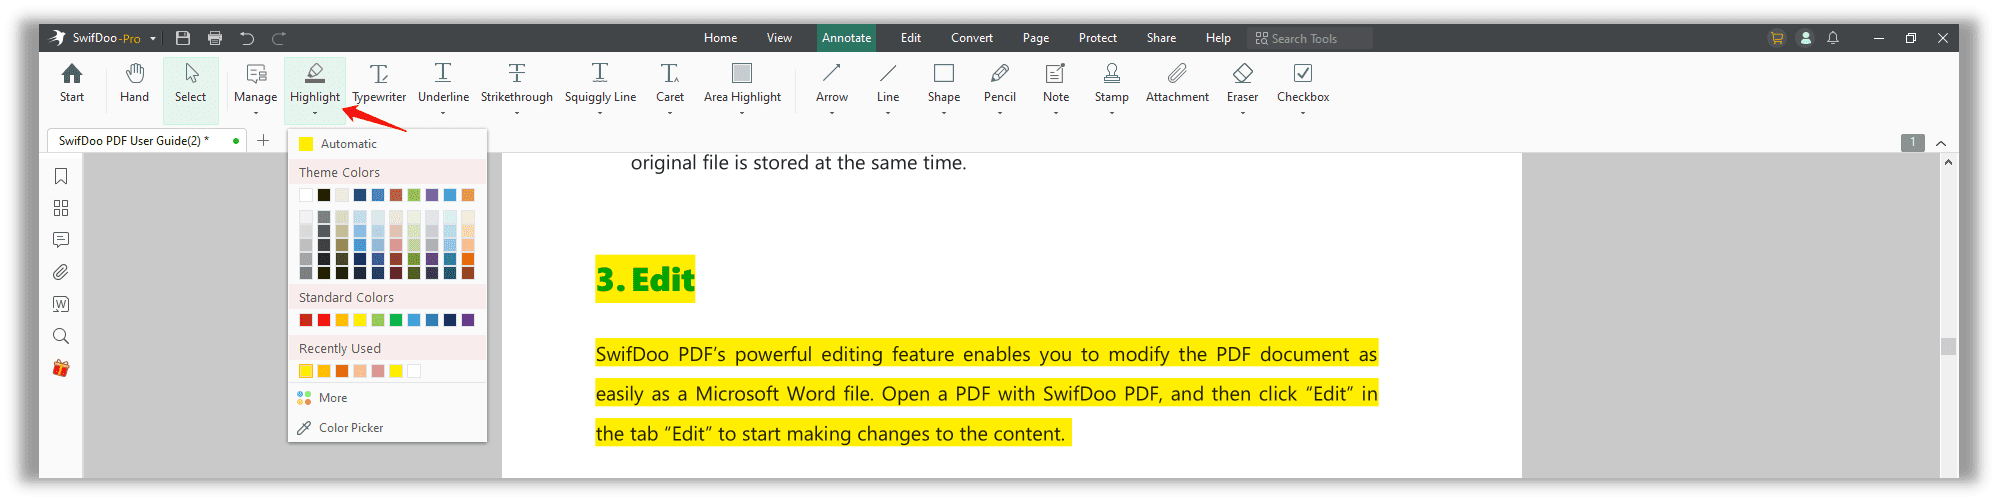 How to highlight a PDF on Windows in SwifDoo PDF